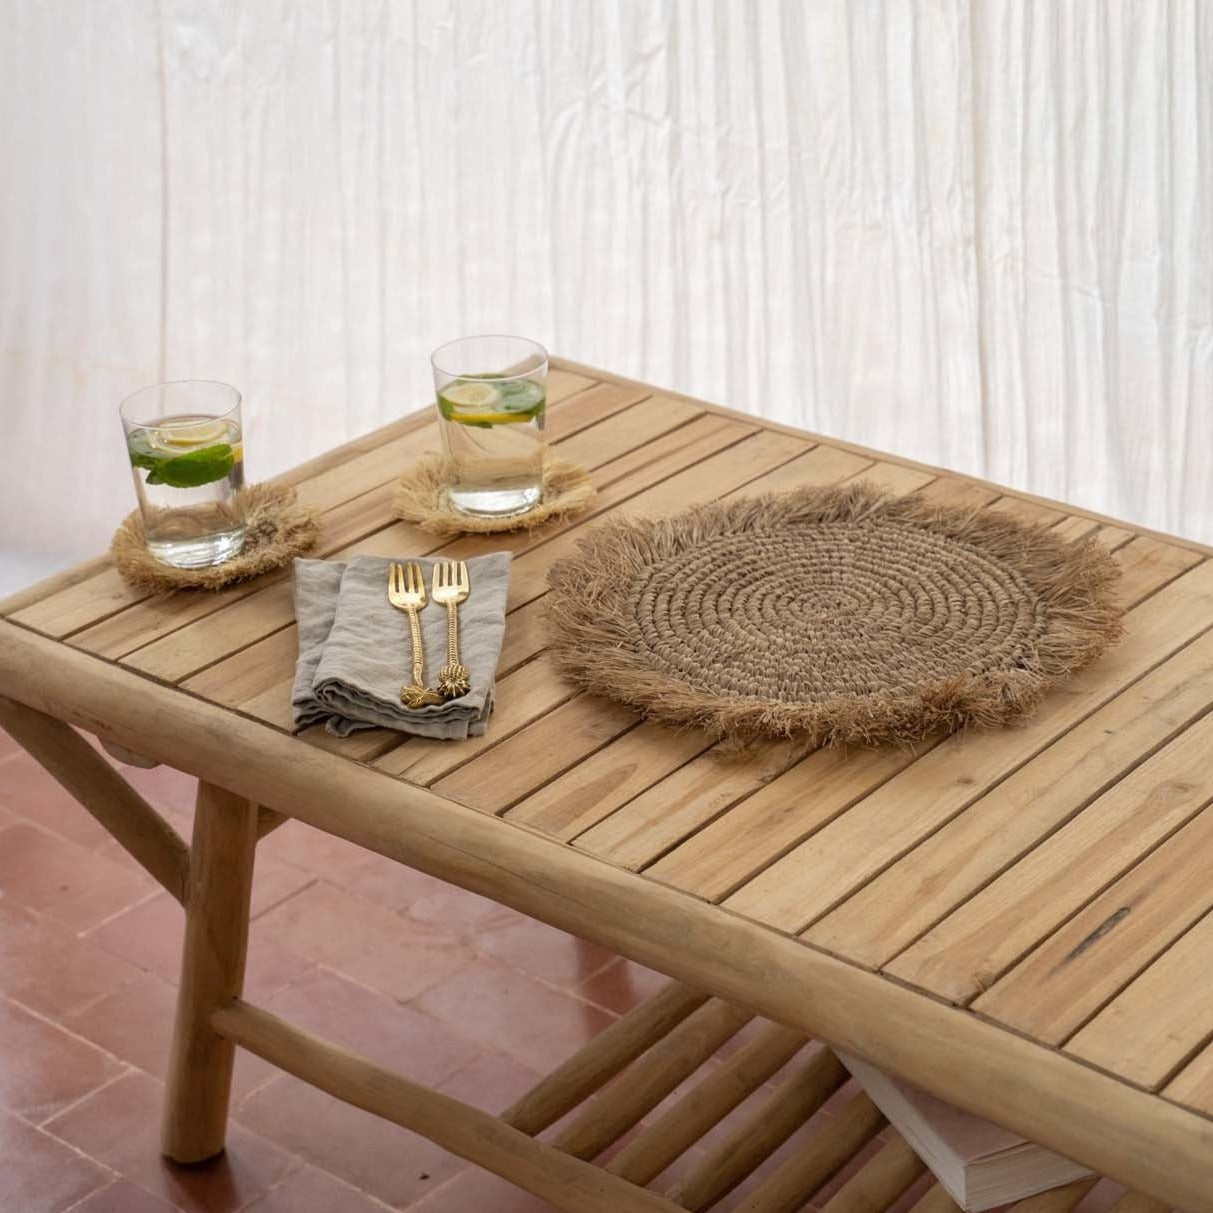 THE TULUM Coffee Table interior view